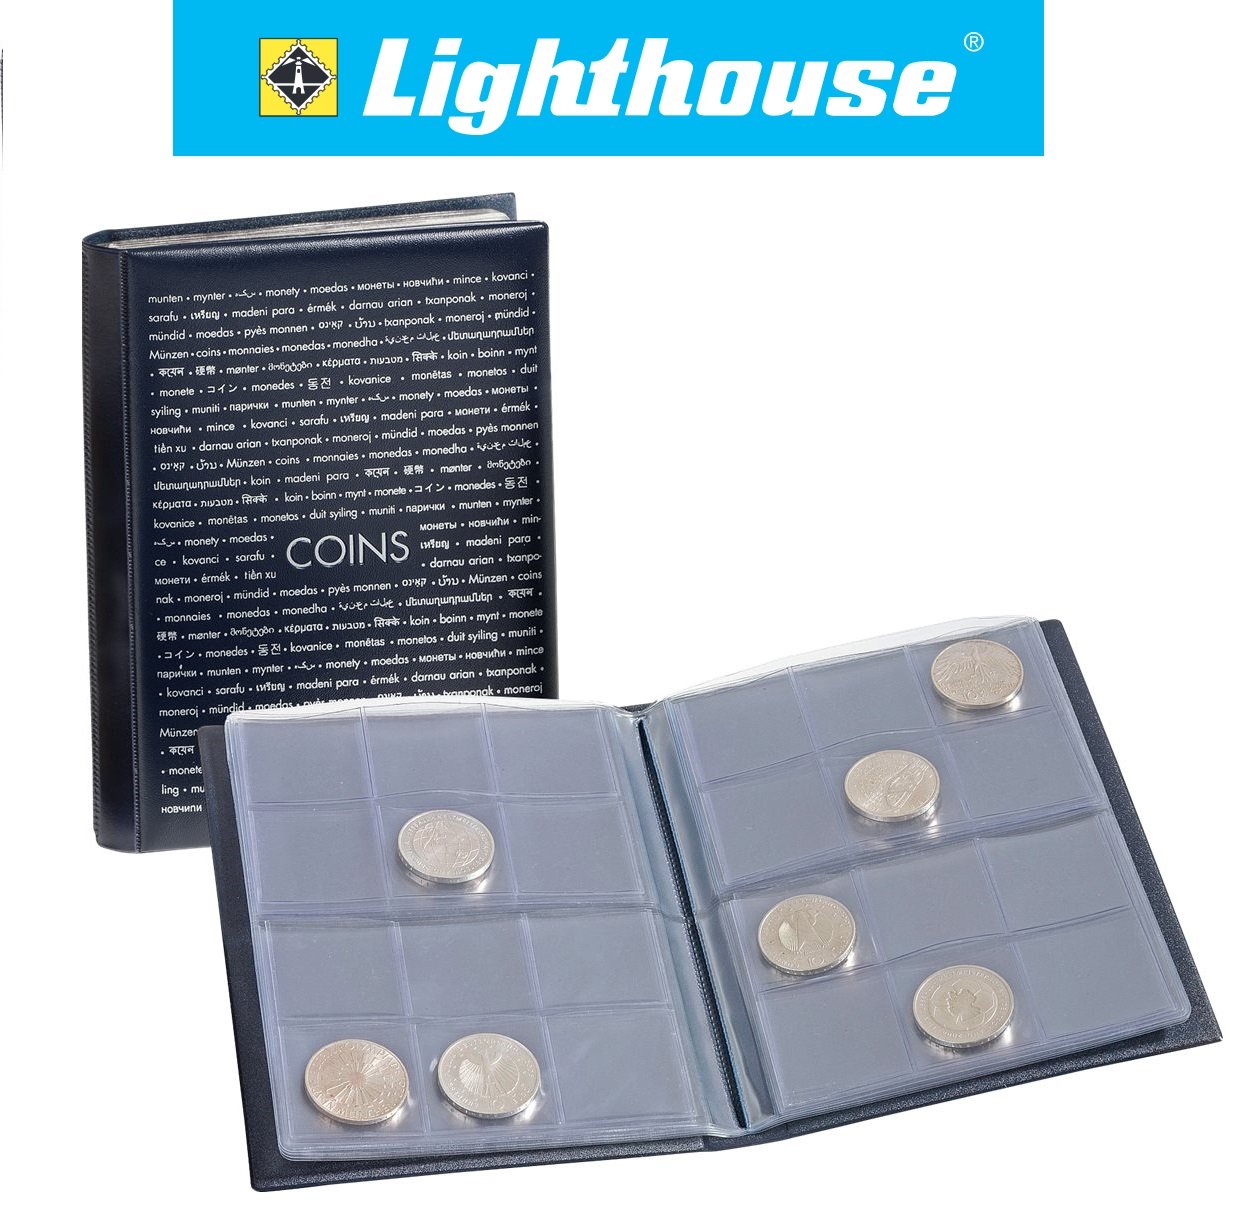 Lighthouse ROUTE Album For 96 Coins, Pocket Album With Padded Cover With 8 Clear Sheets, 12 Pockets per Sheet For Upto 33mm Diameter Coins, Coin Album Made In Germany